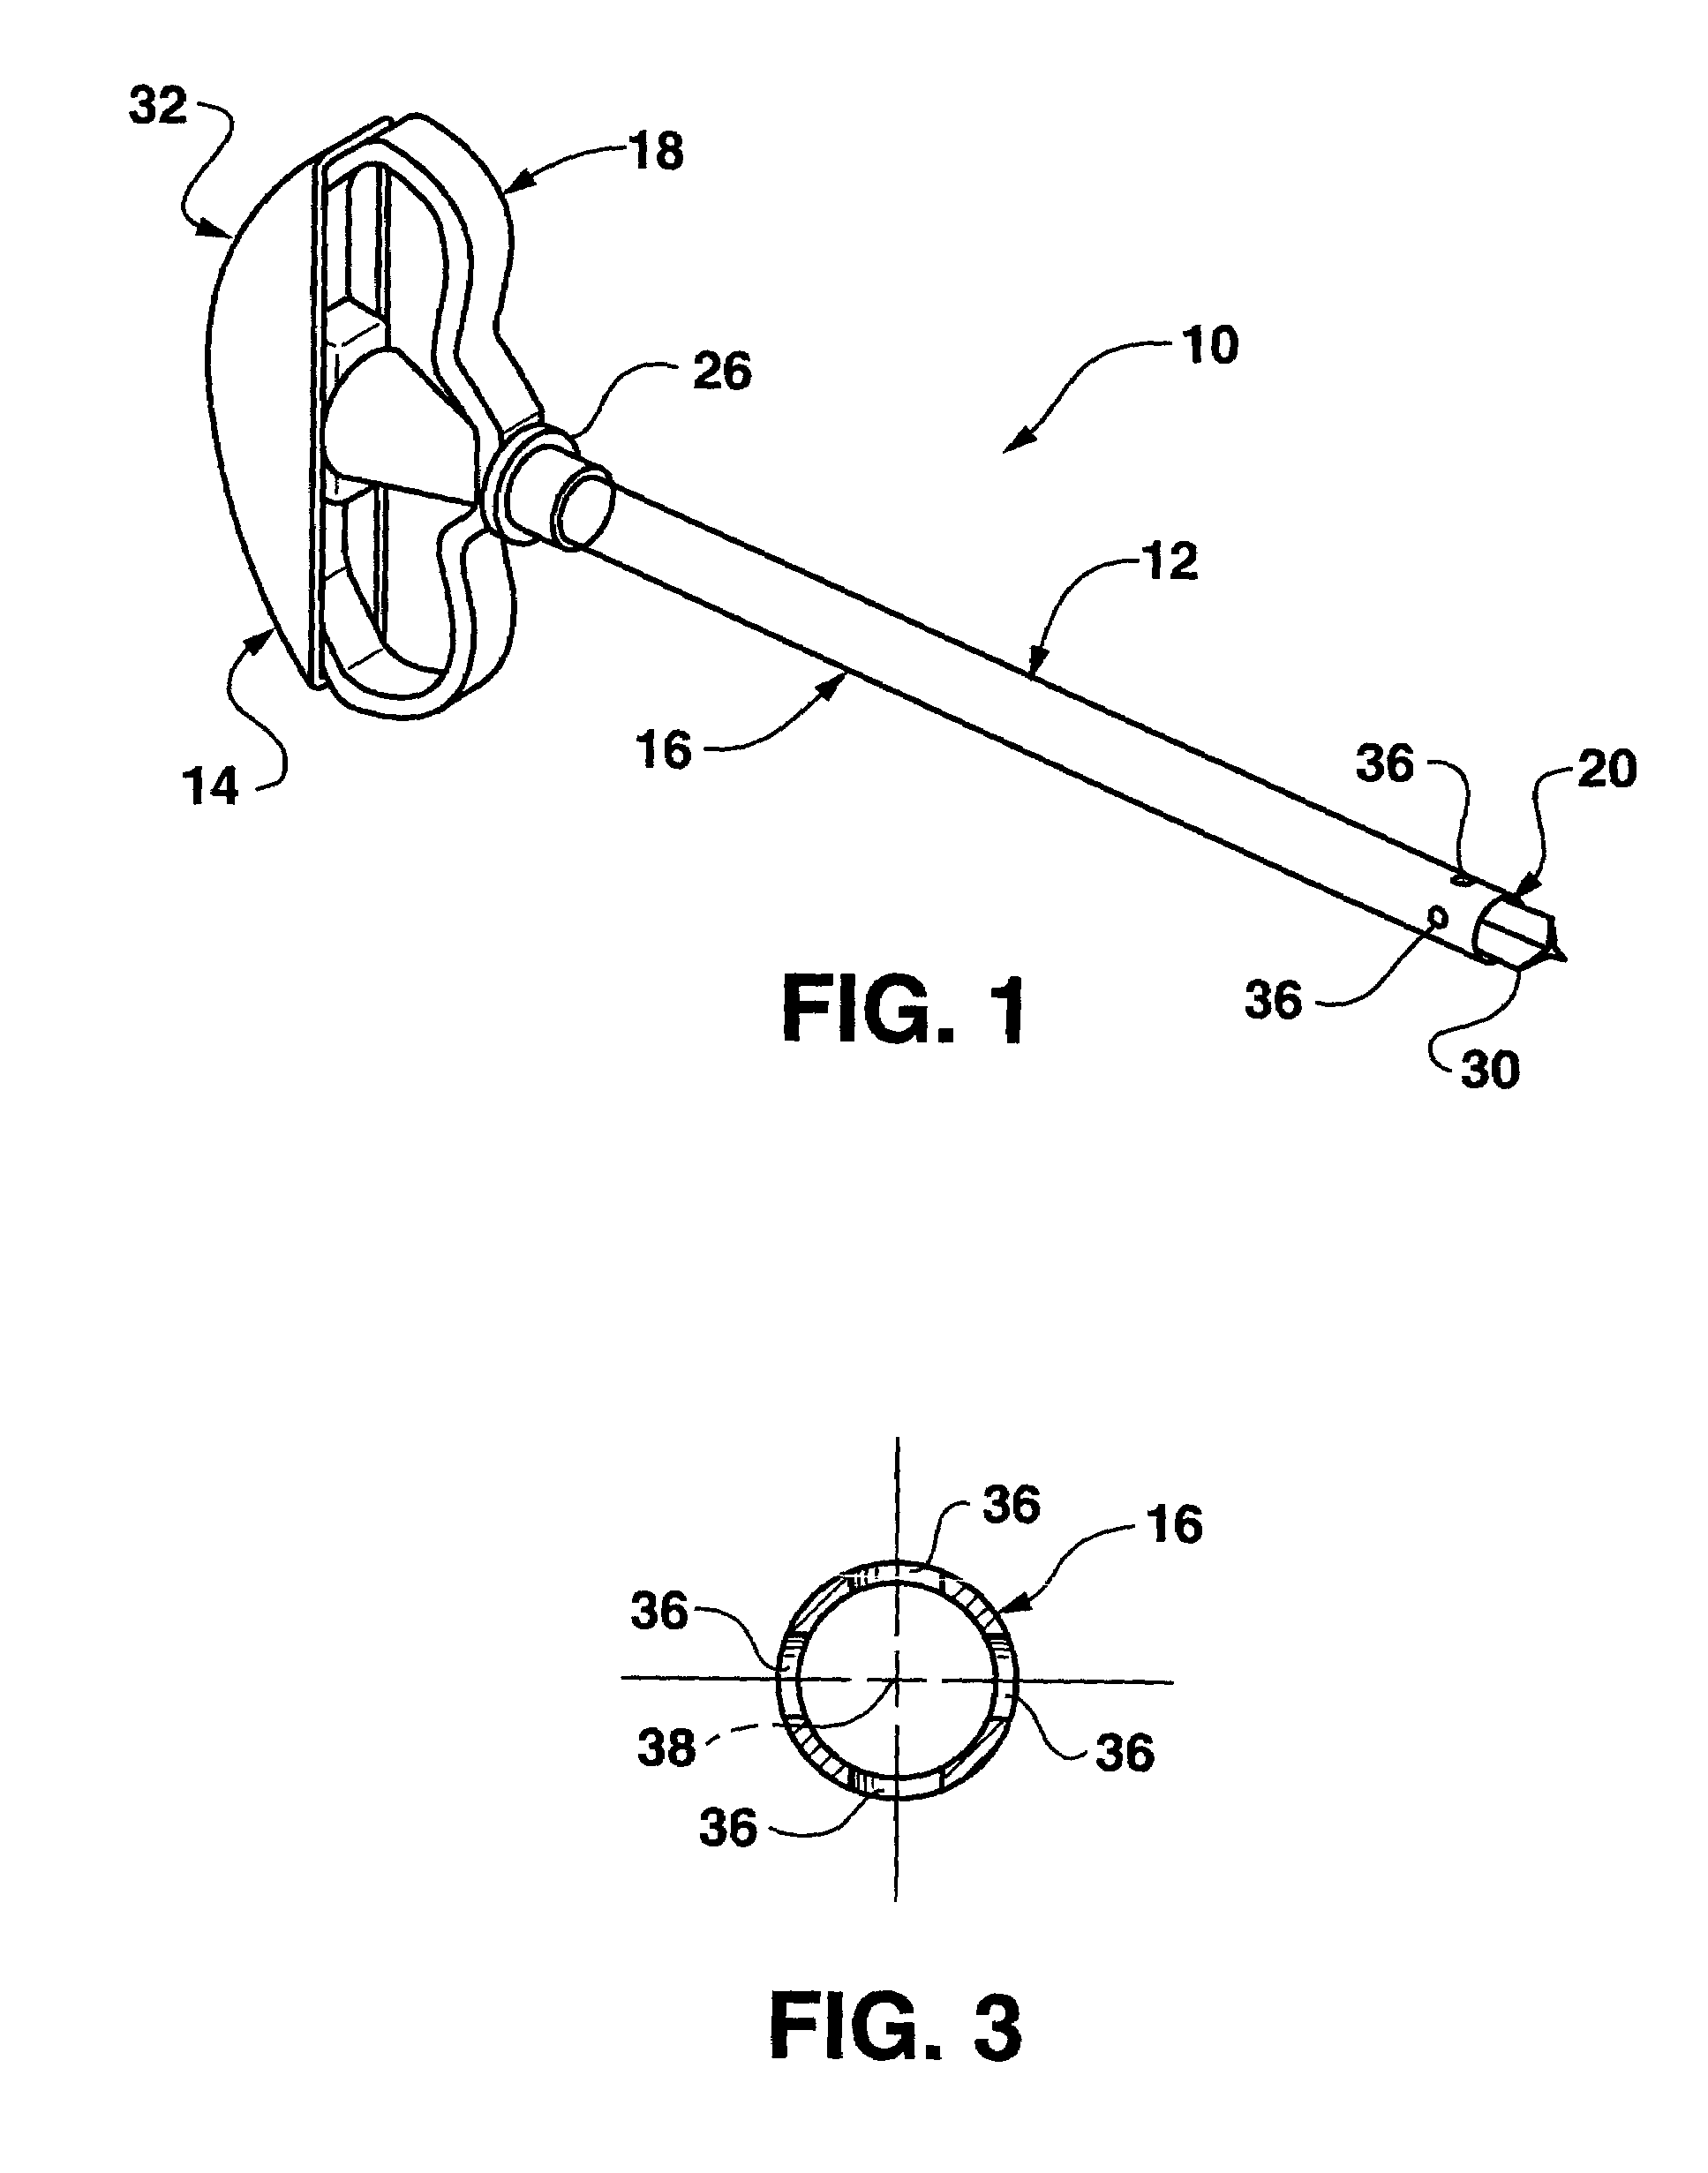 Bendable needle for delivering bone graft material and method of use